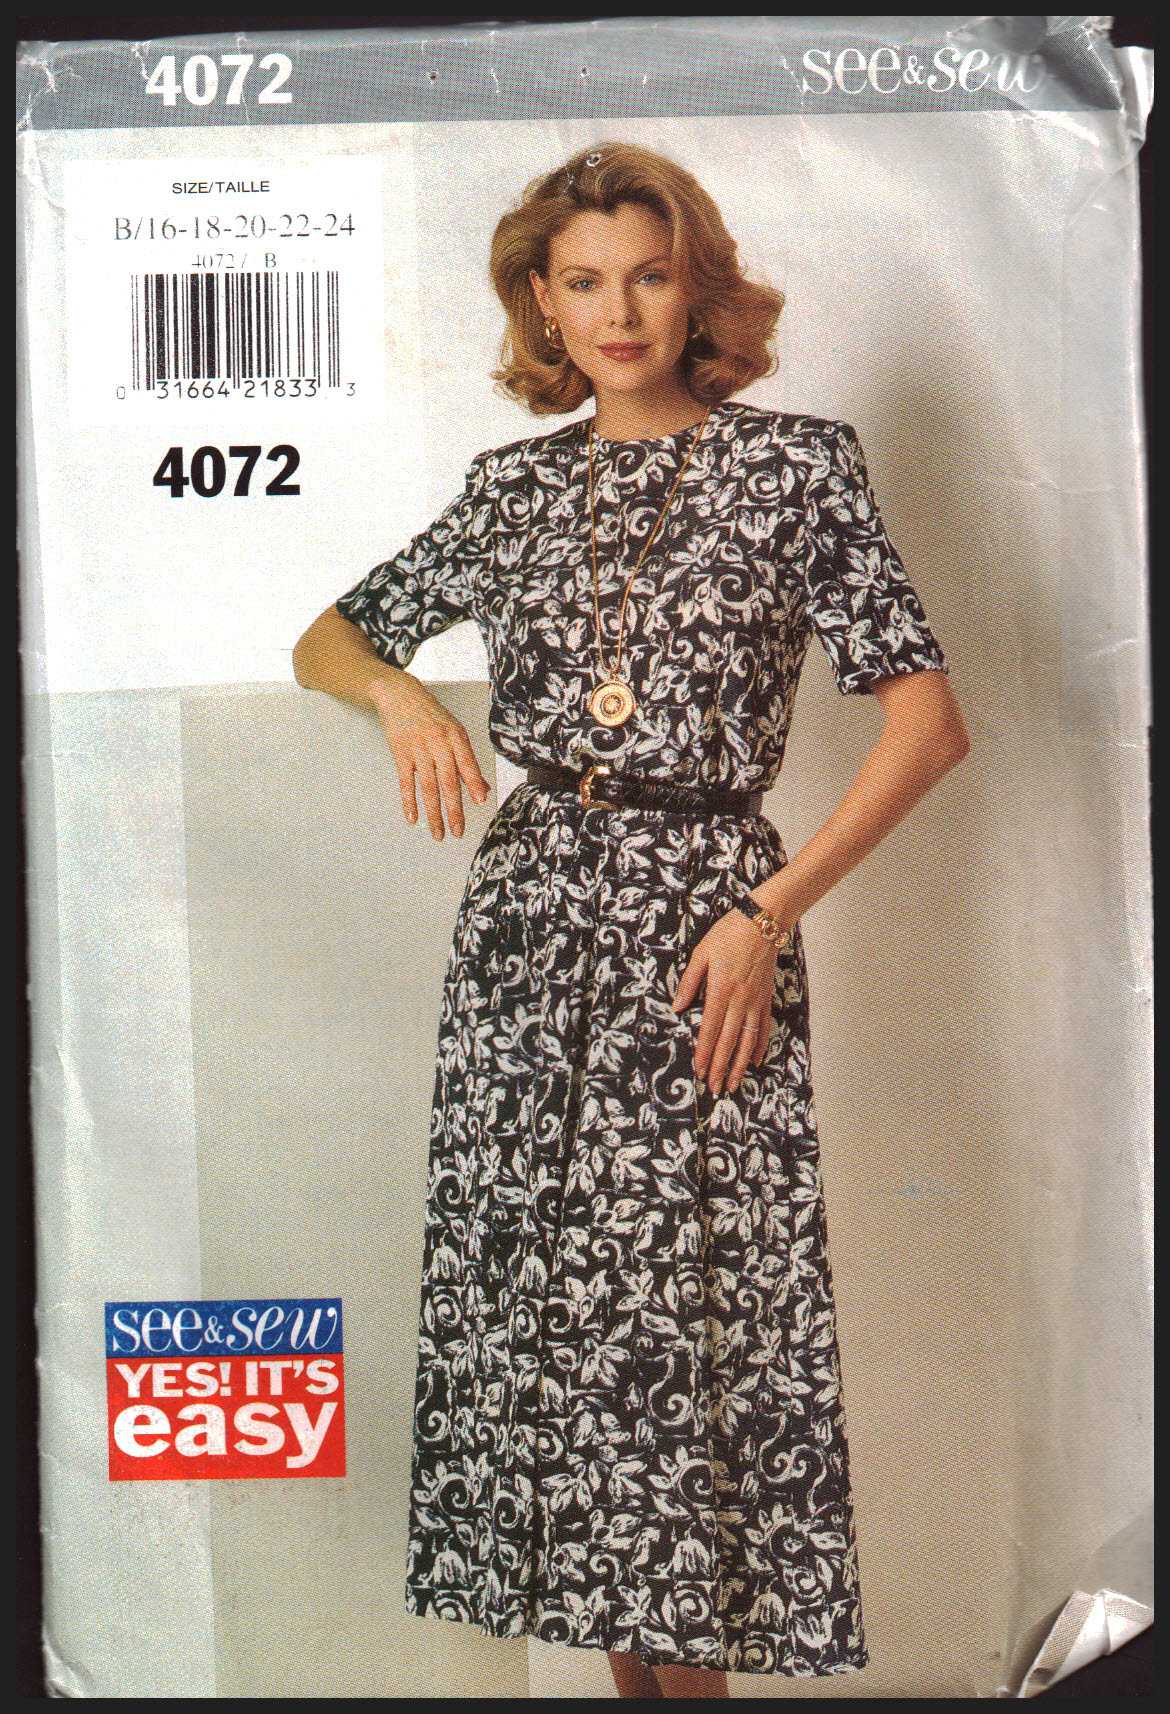 Butterick 4072 Dresses Size: B 16-18-20-22-24 Used Sewing Pattern